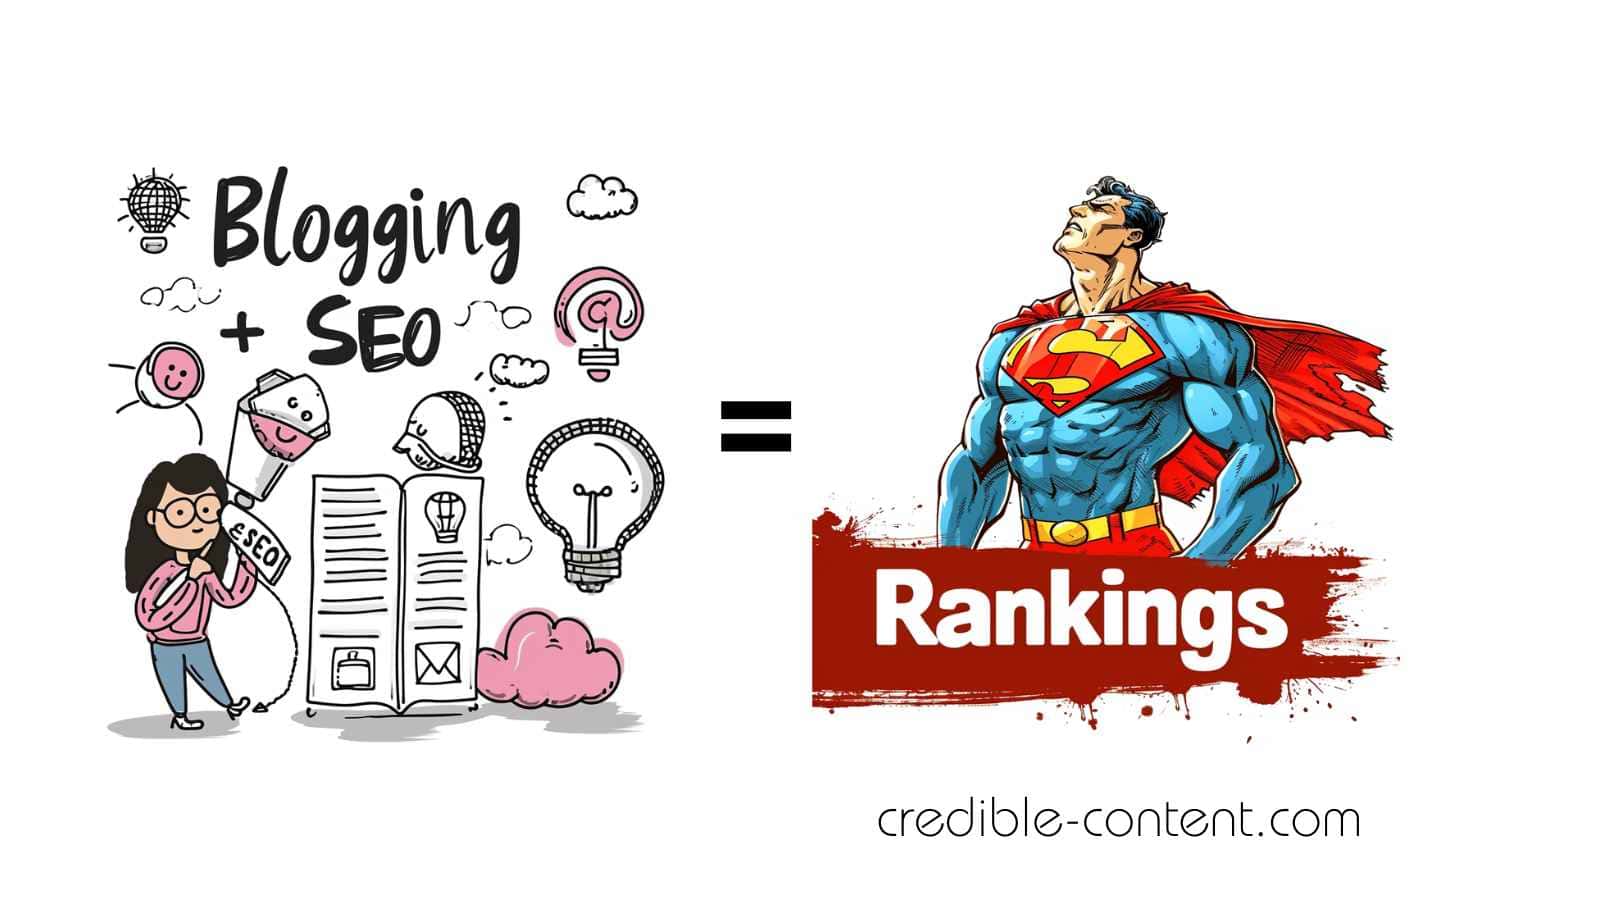 Blogging and SEO improve your rankings